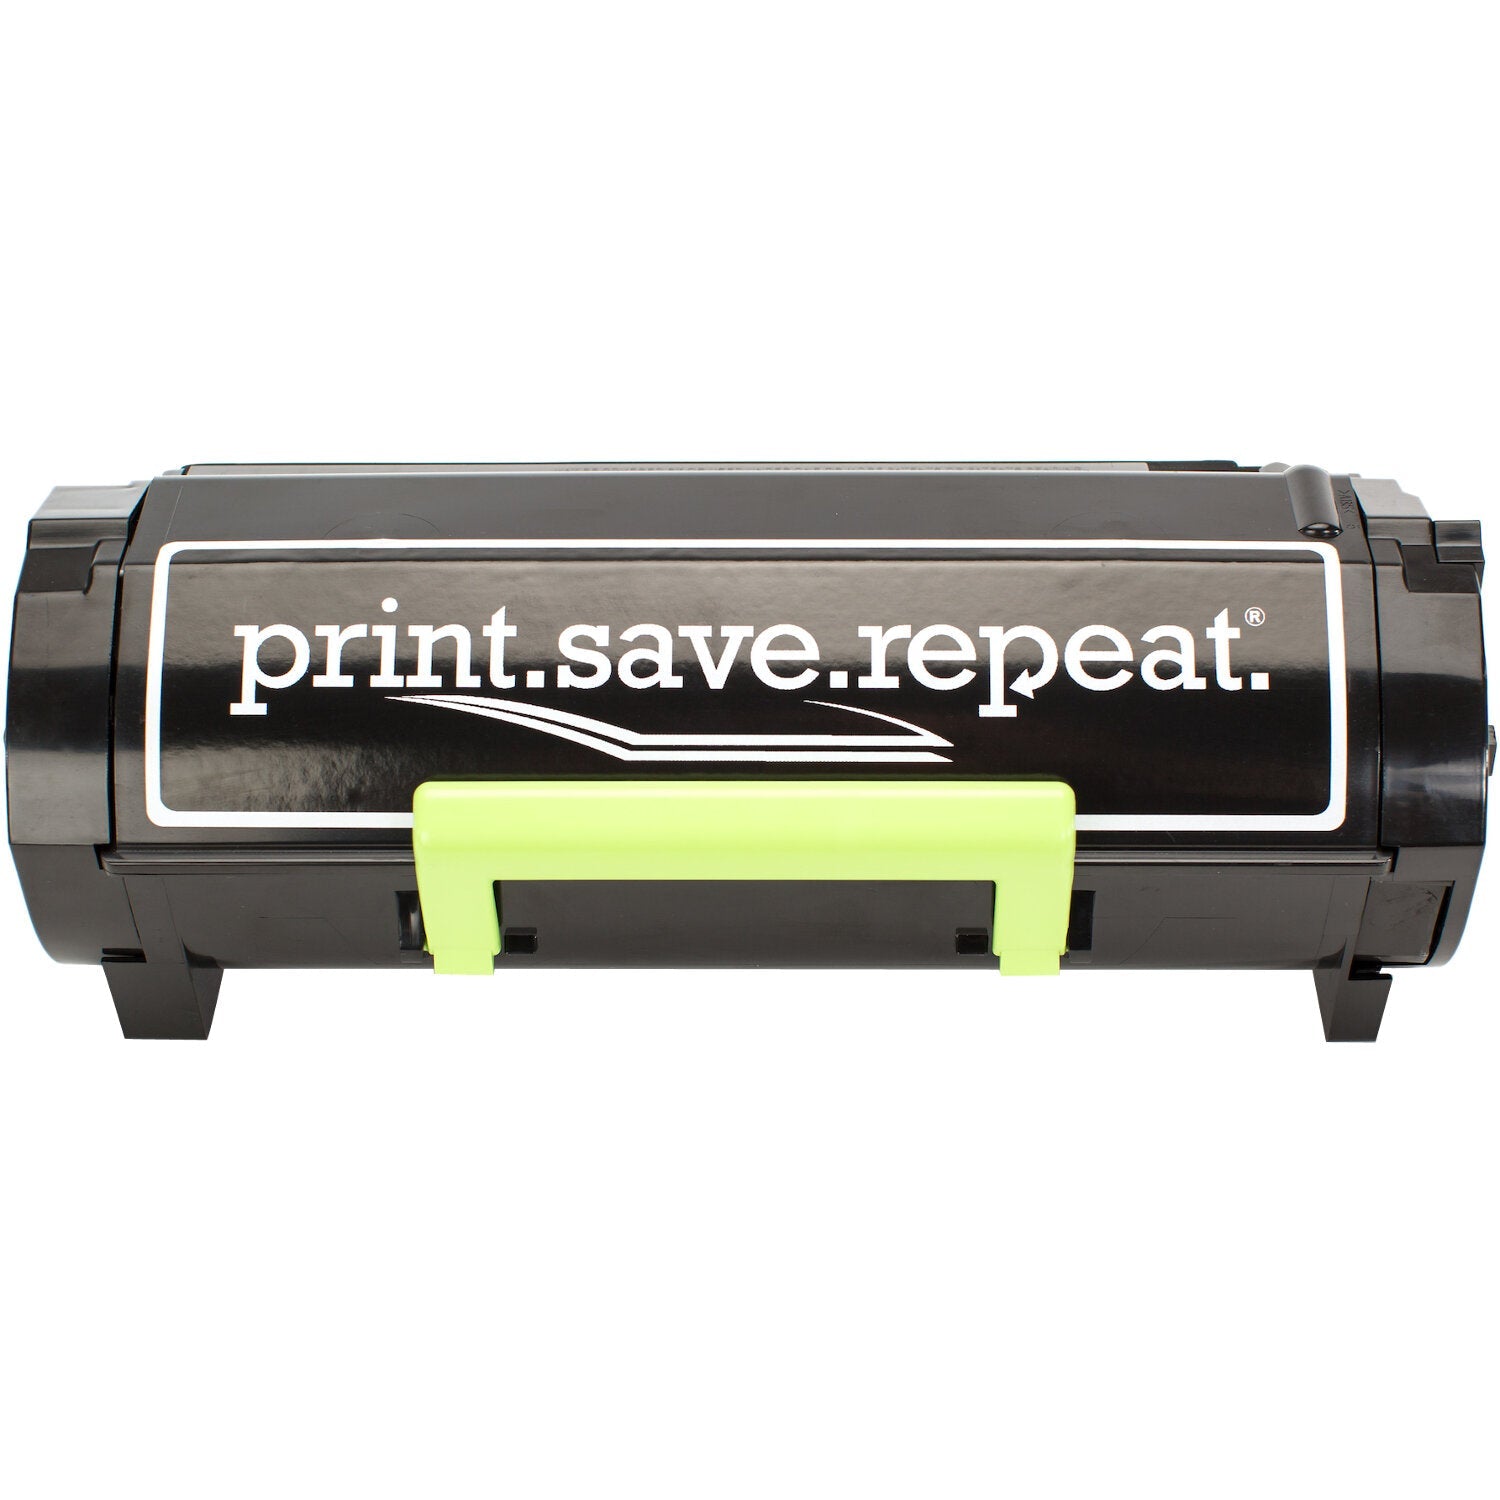 Print.Save.Repeat. Lexmark 51B0HA0 Remanufactured High Yield Toner Cartridge for MS417, MS517, MS617, MX417, MX517, MX617 [8,500 Pages]